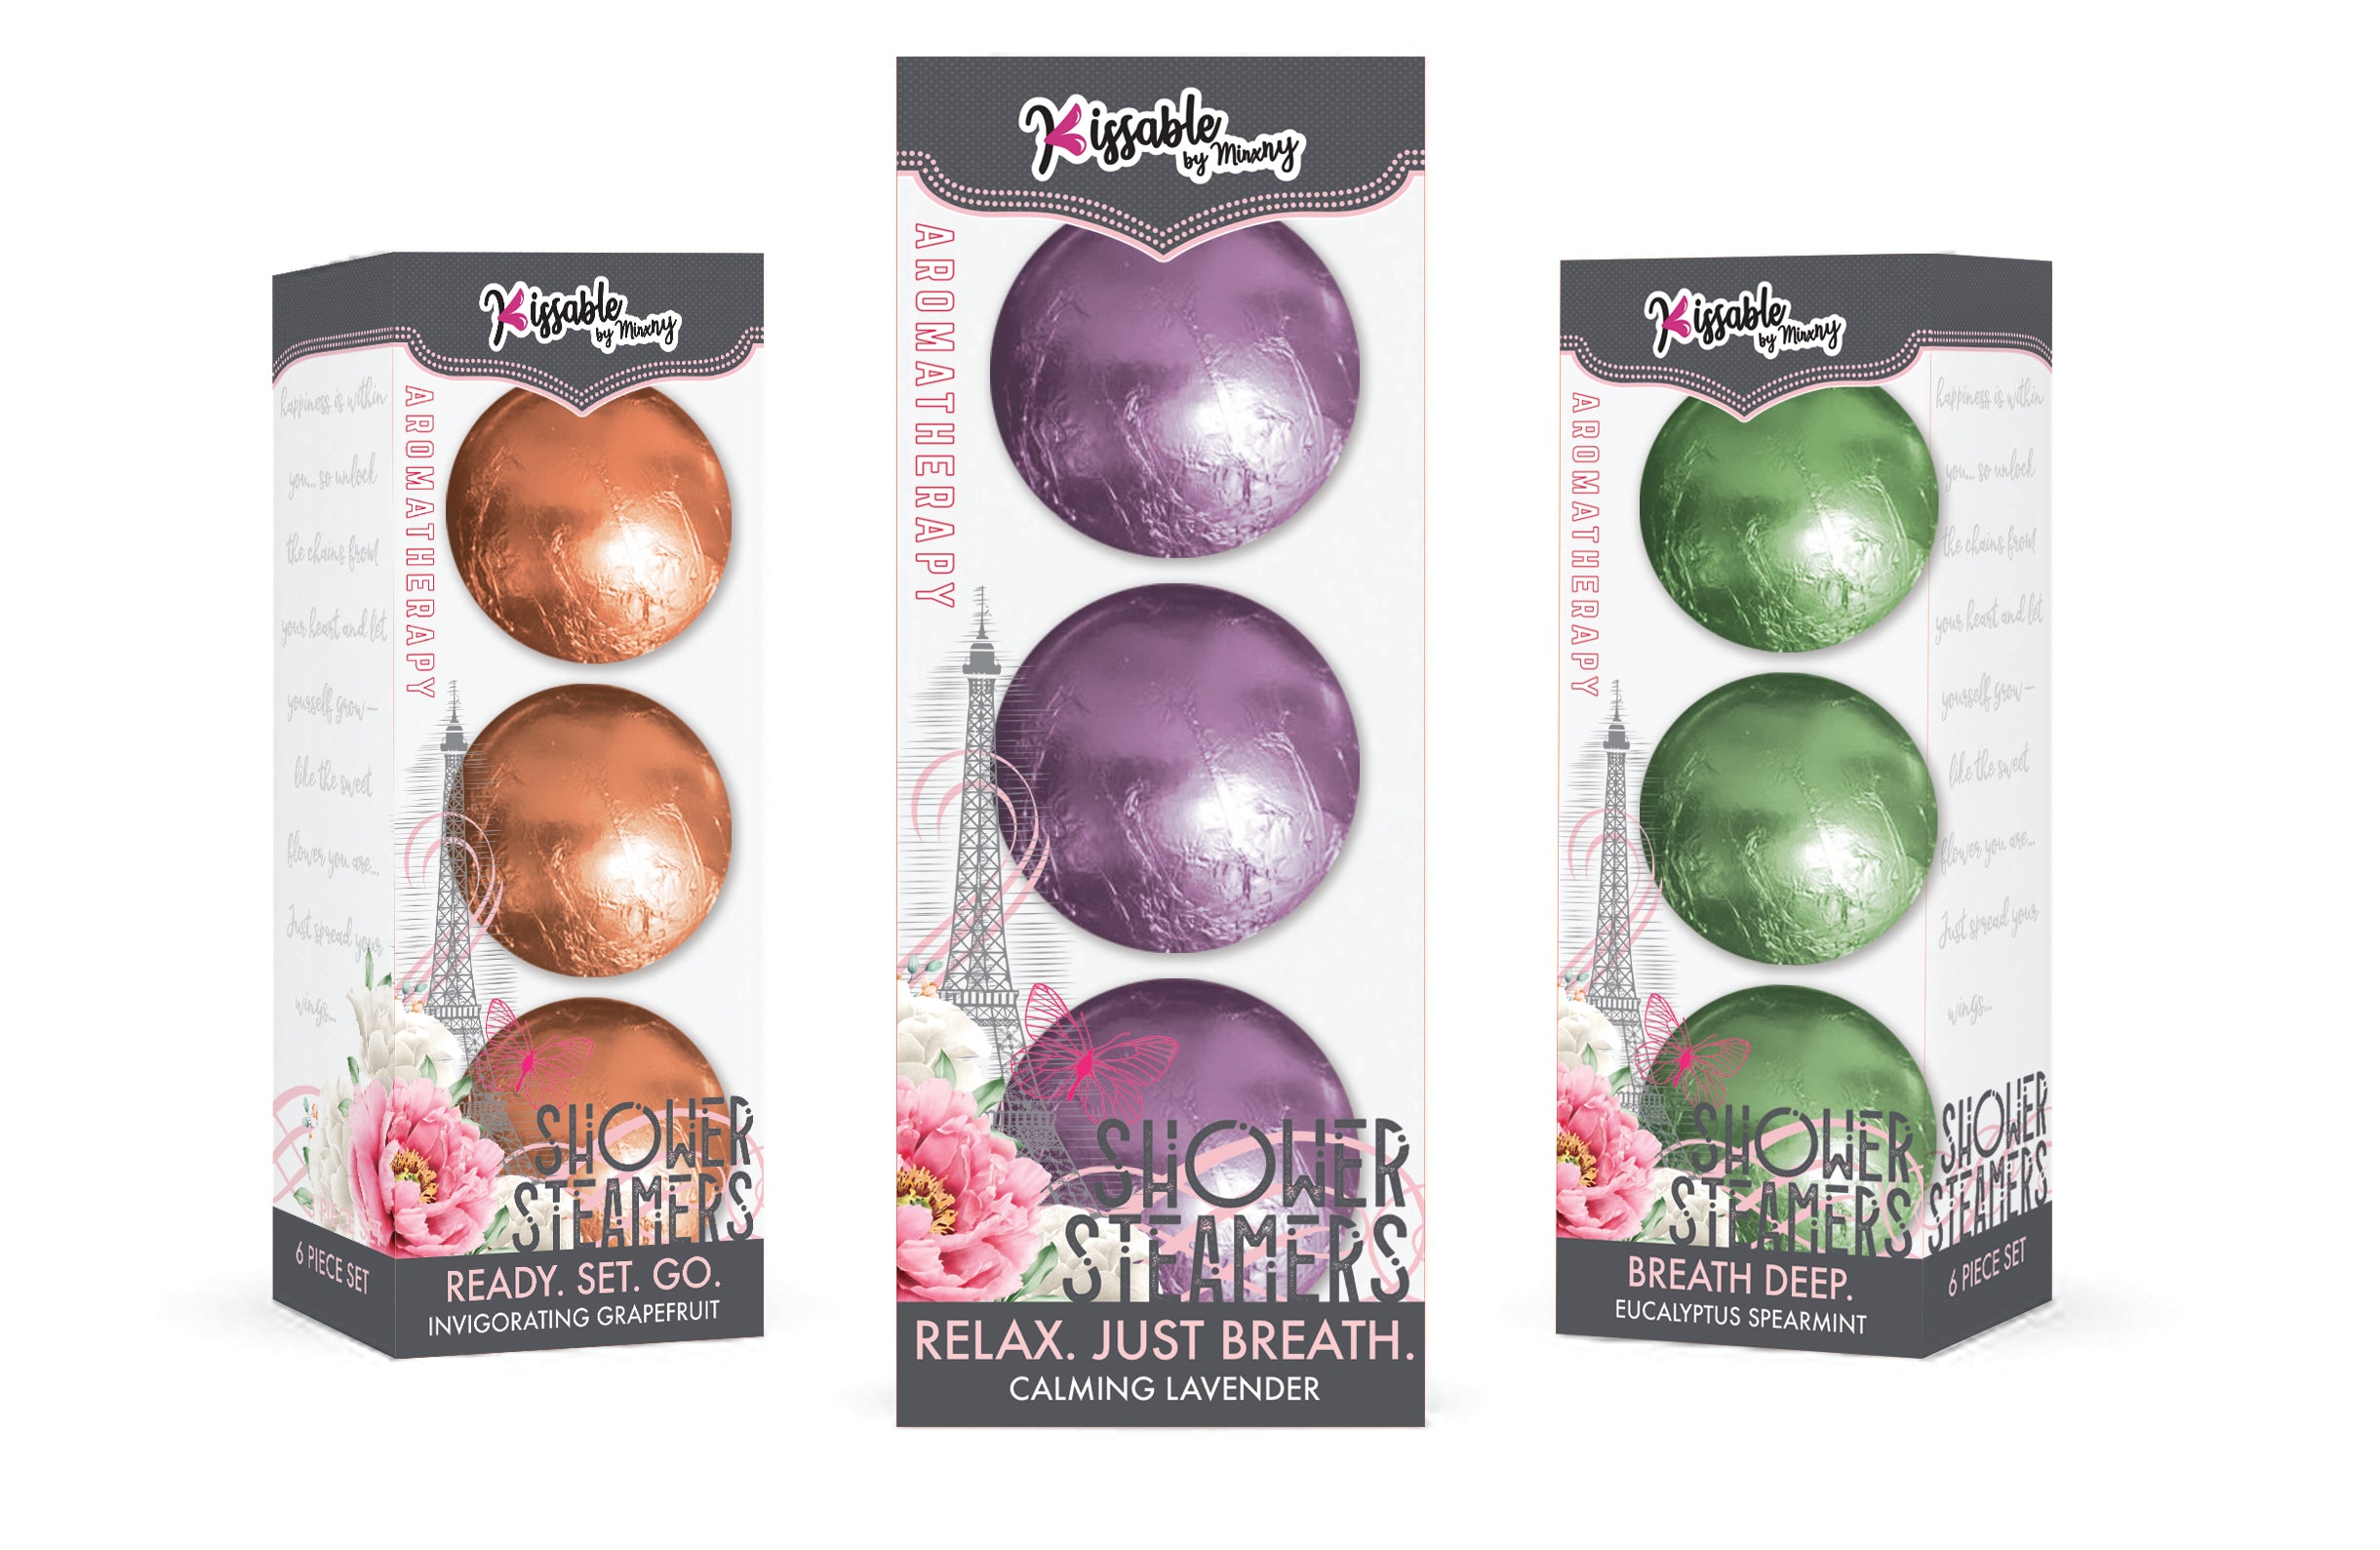 Essential oil releasing and lavender scented 3 pack of shower steamers